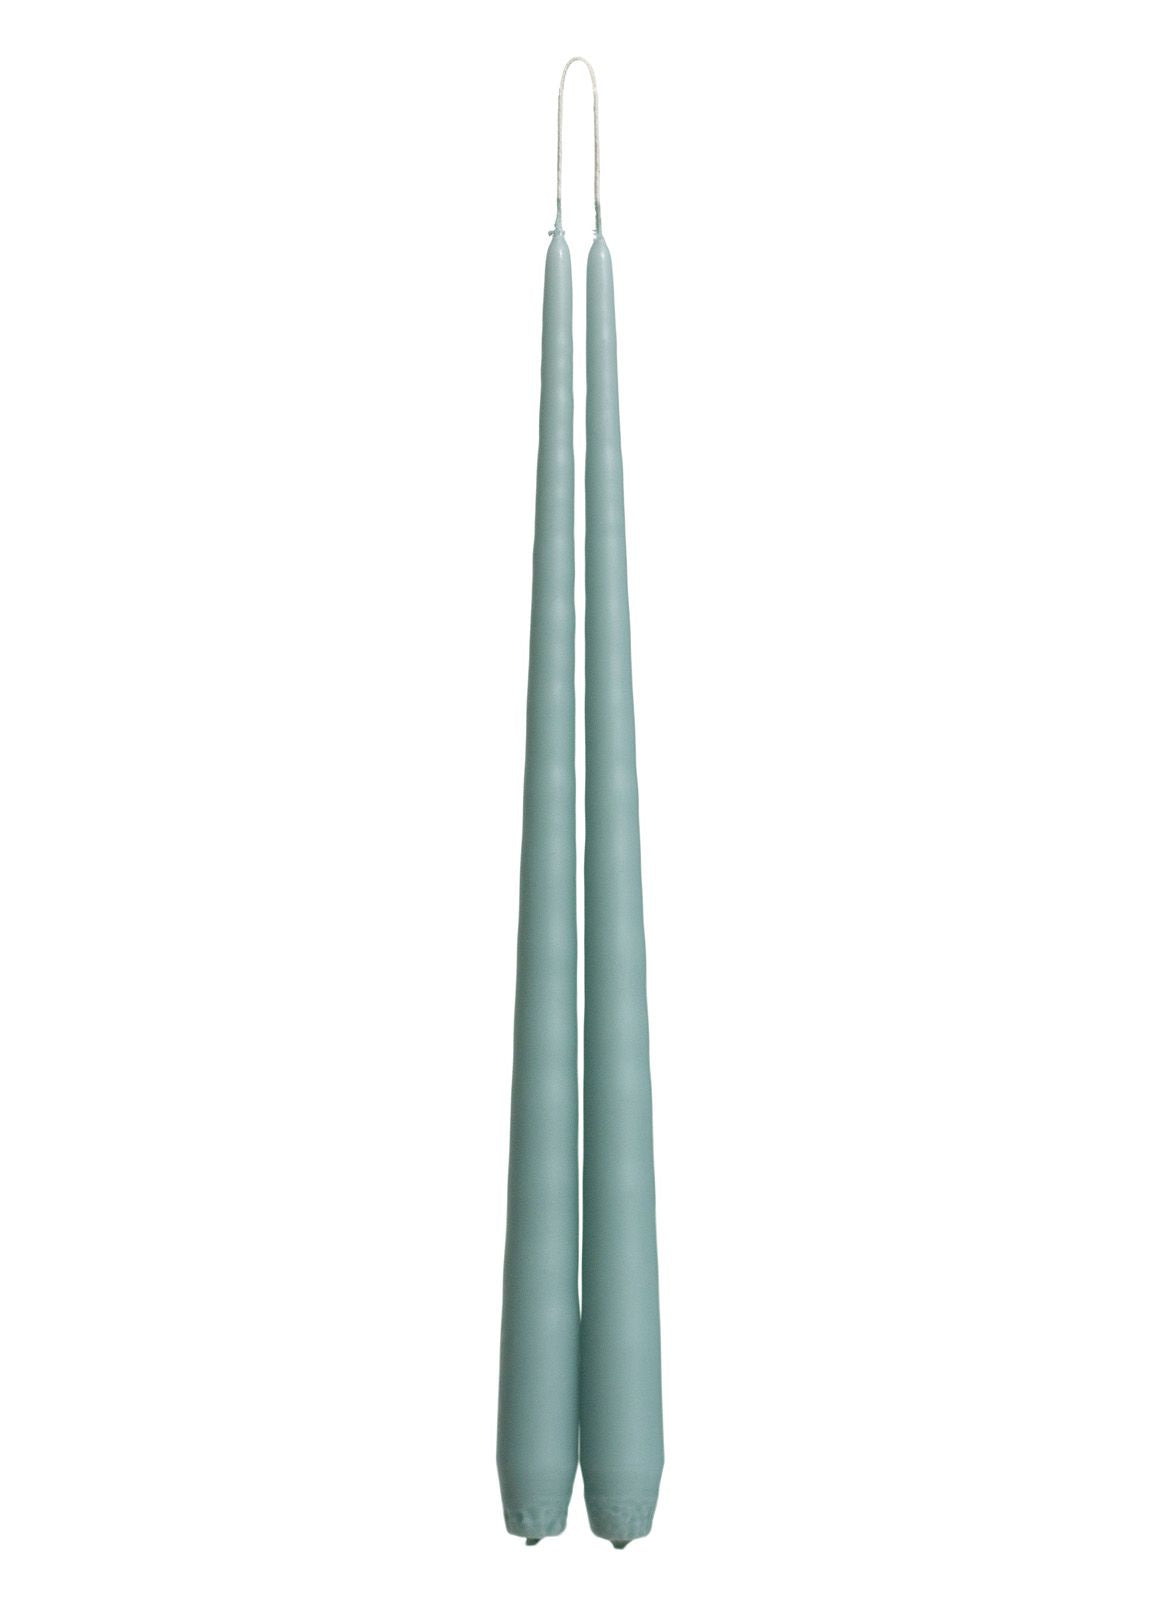 Teal Tapered Candle - pair